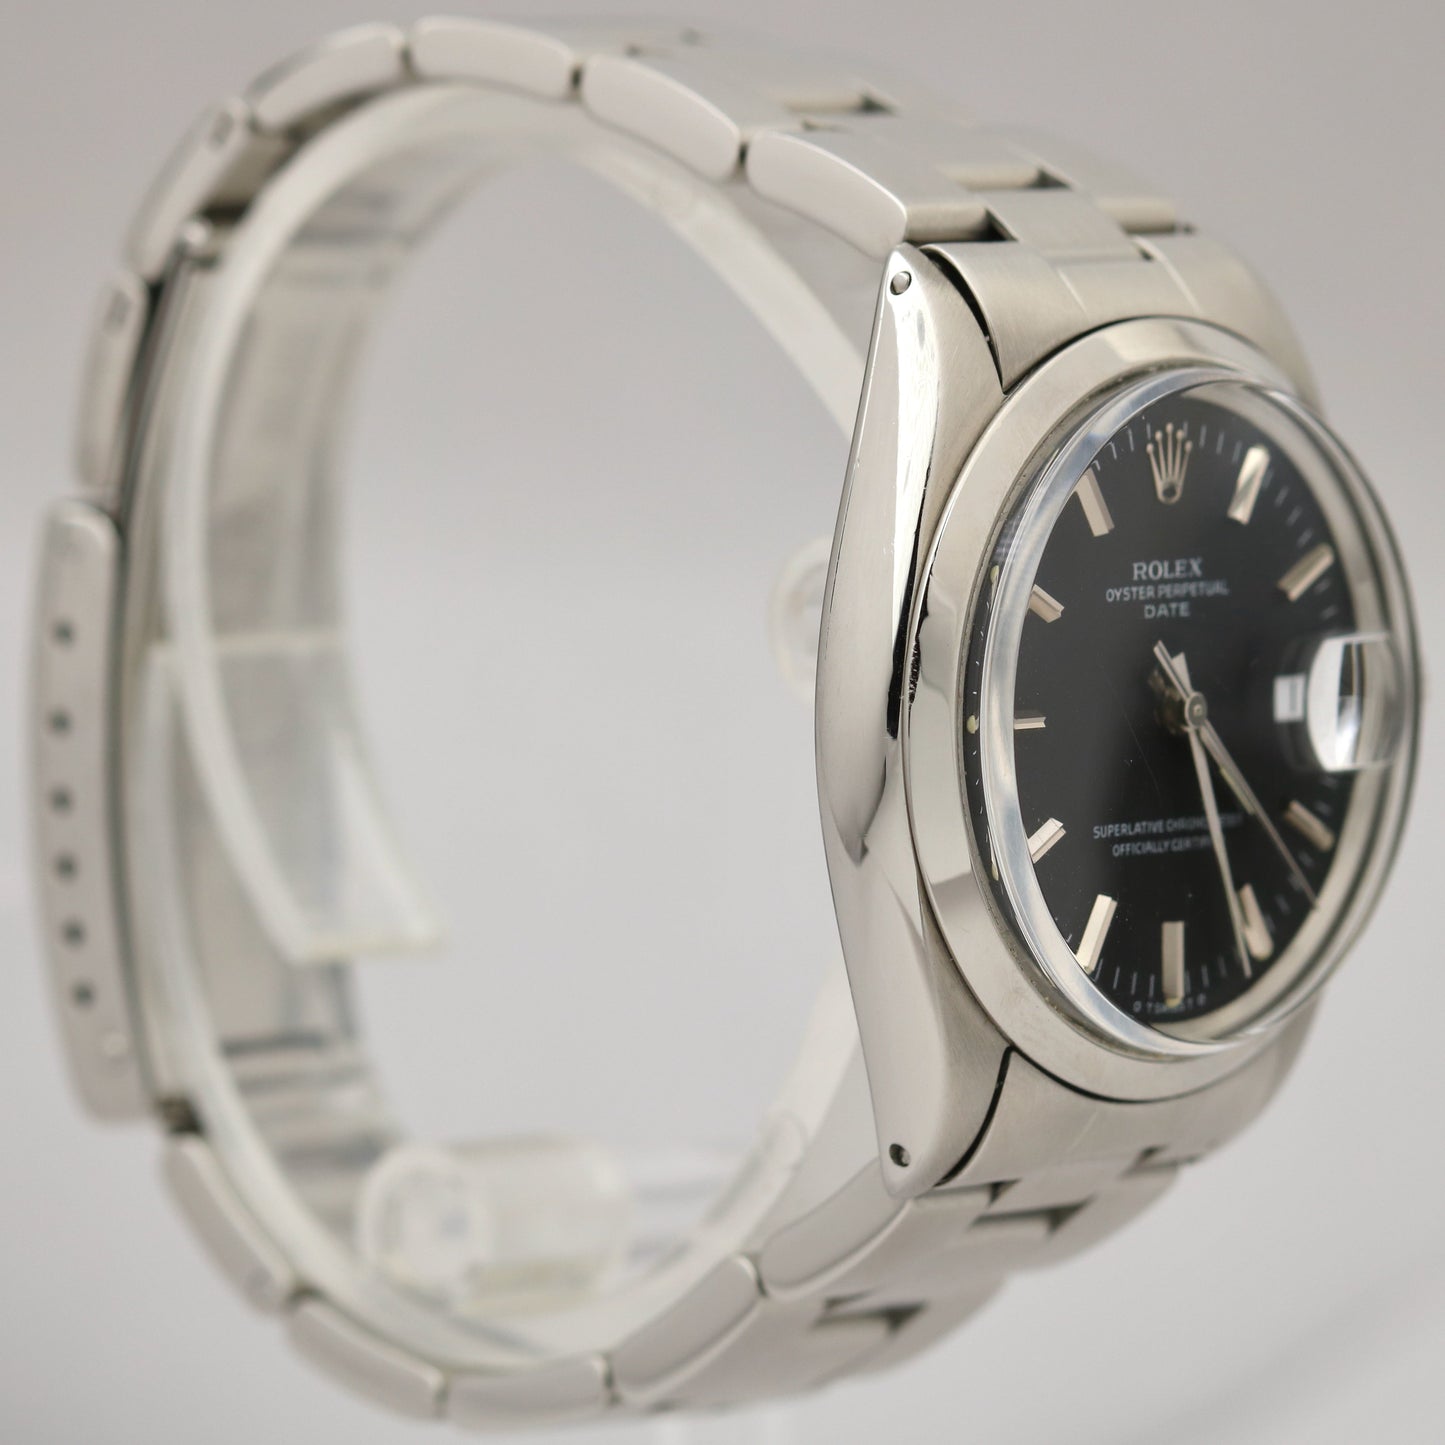 1967 Rolex Oyster Perpetual Date BLACK 34mm Stainless Steel Oyster Watch 1500